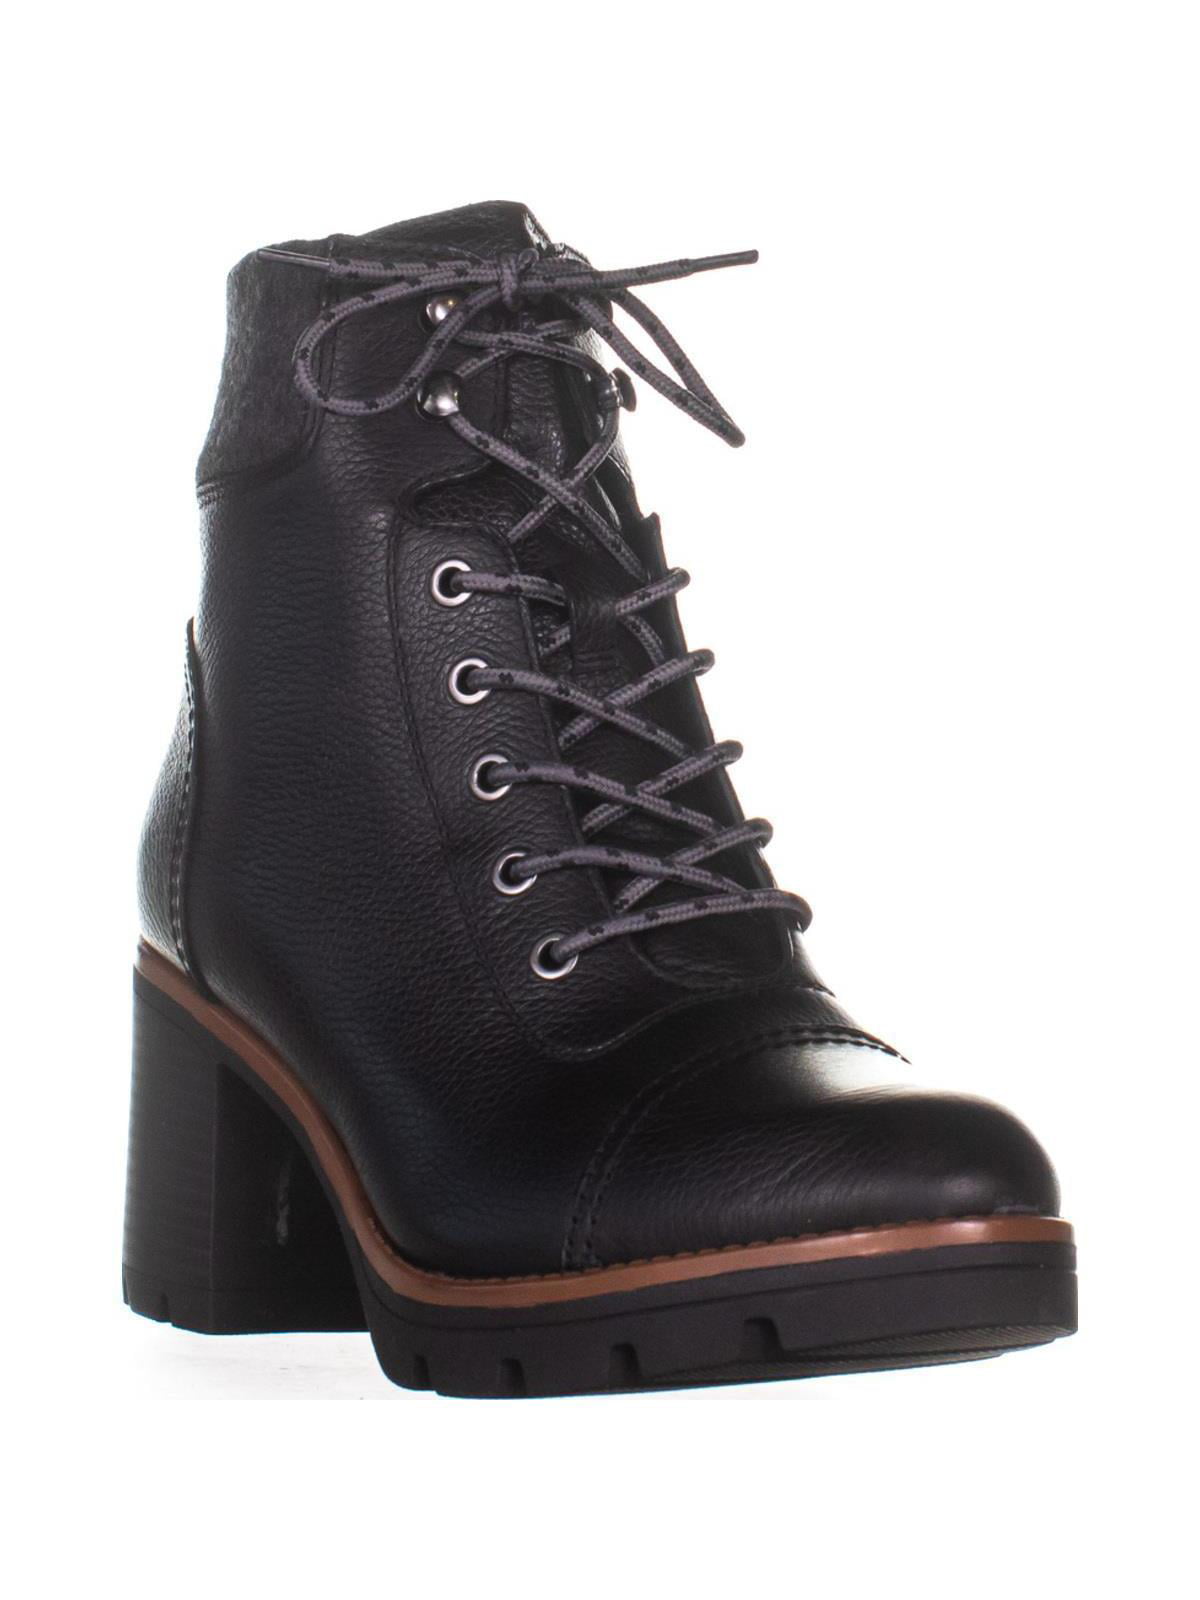 naturalizer lace up boots